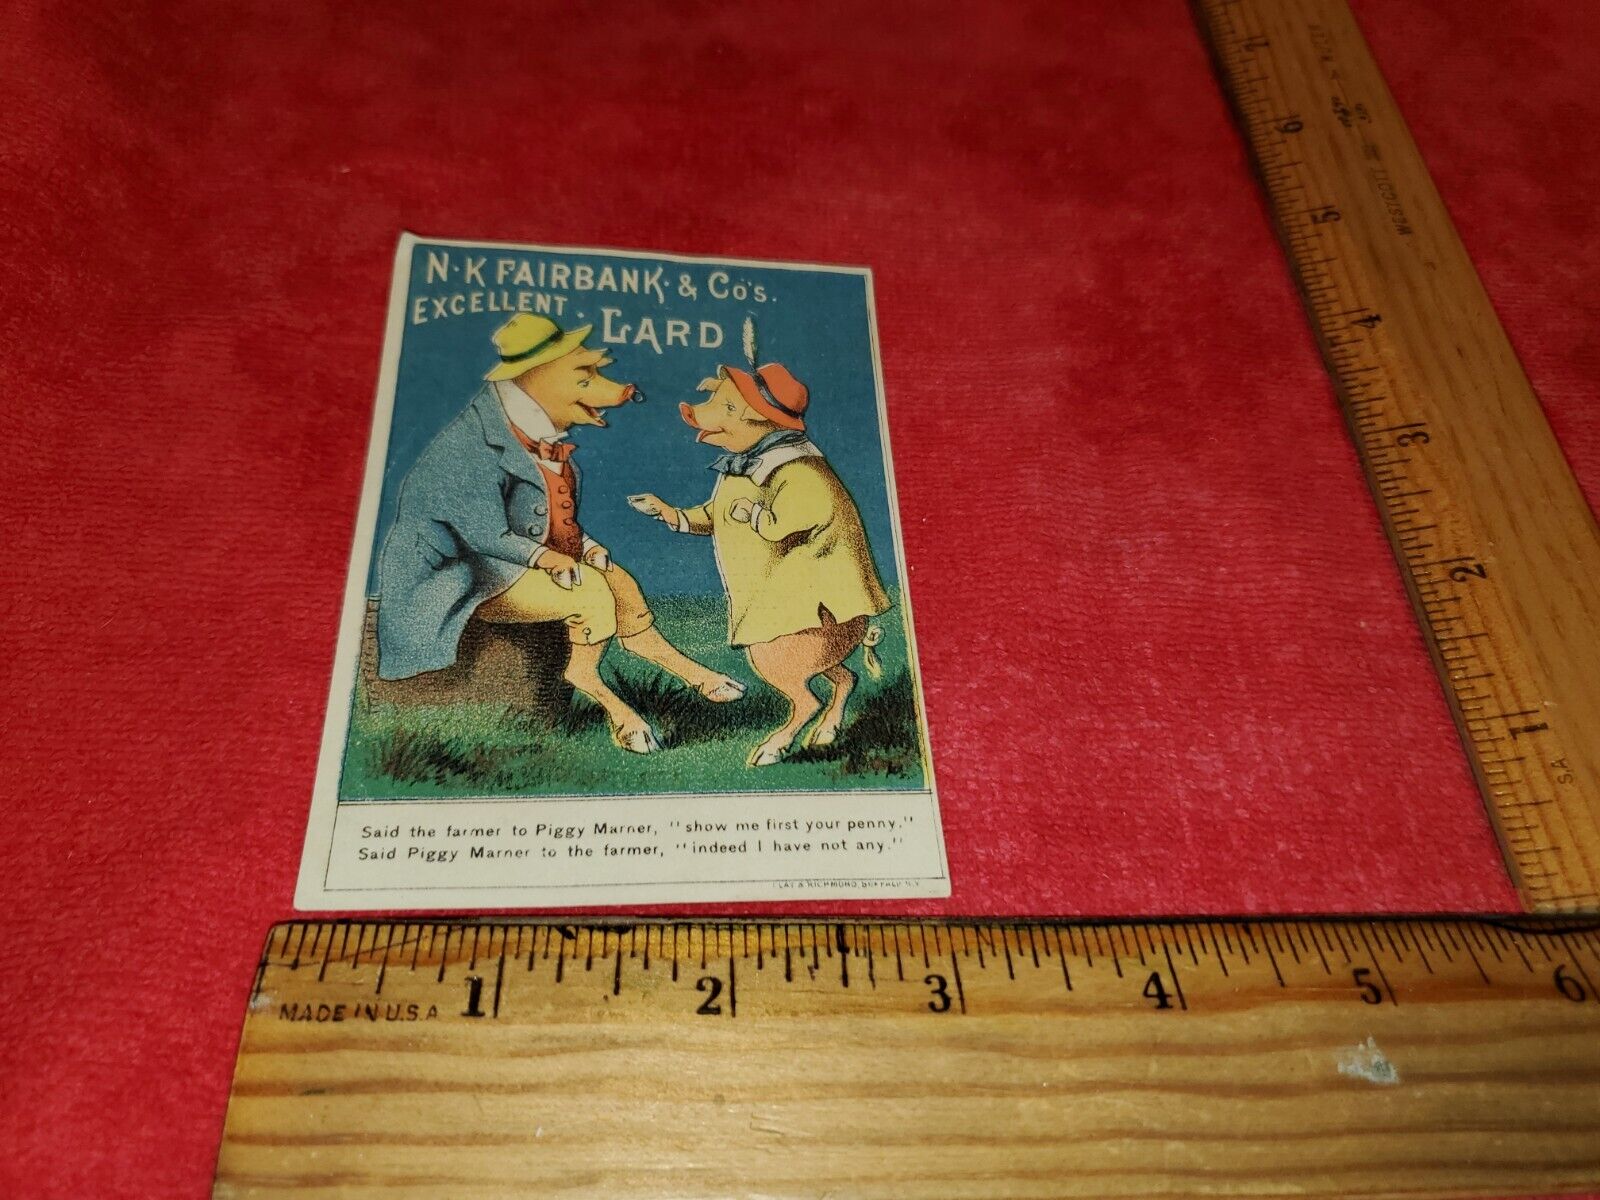 VICTORIAN TRADE CARD OF TWO WELL DRESSED PIGS FOR NK FAIRBANK CO EXCELLENT LARD